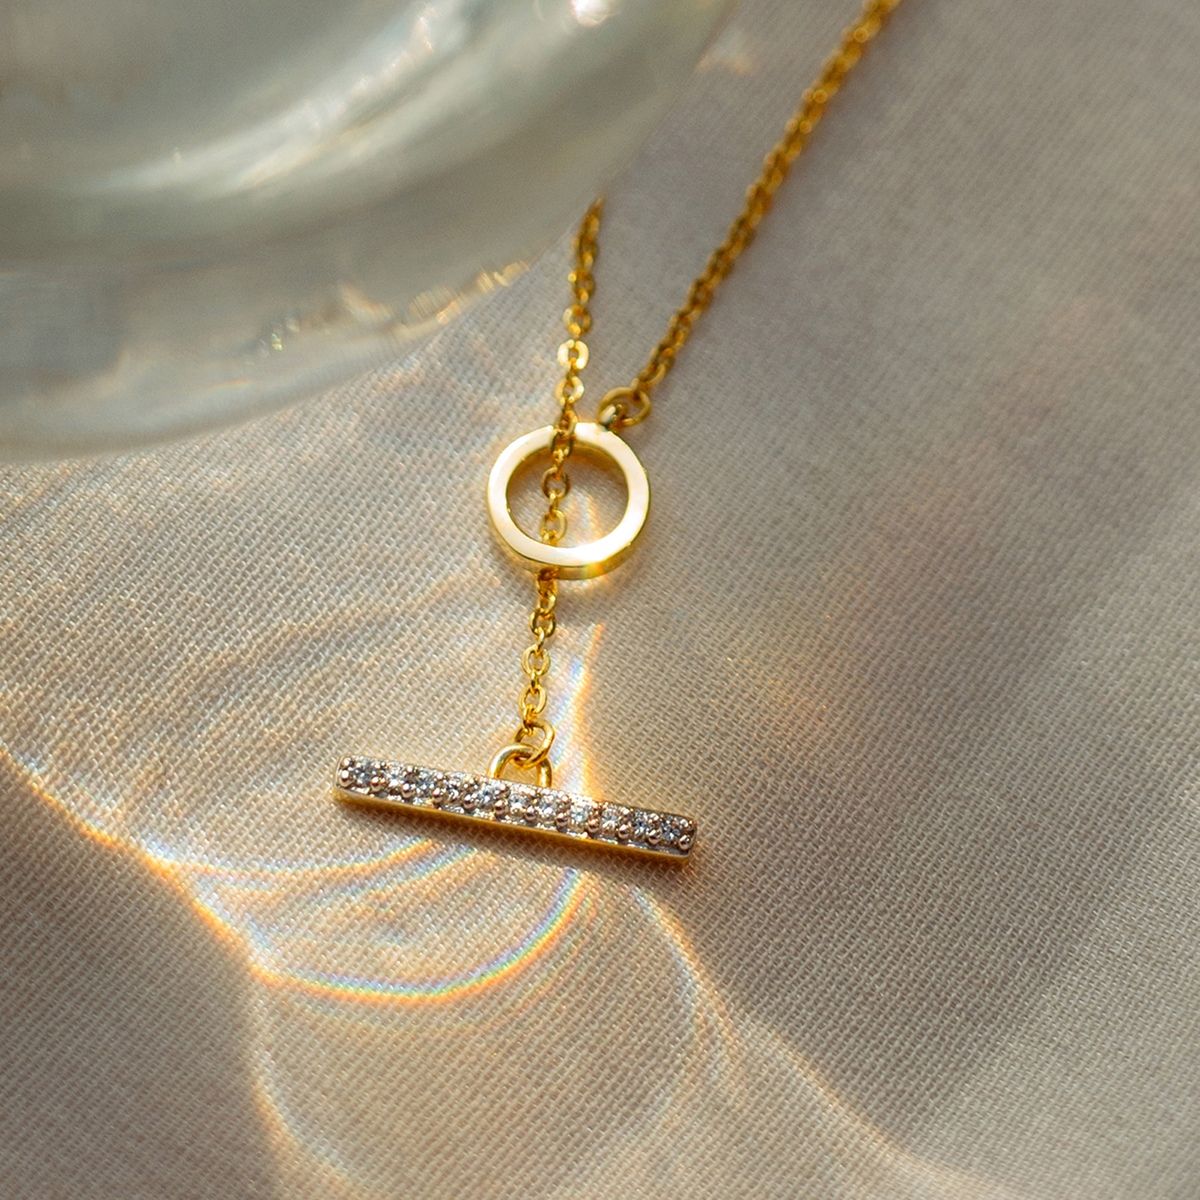 9ct Yellow Gold T-Bar Necklace with Belcher Links – Diana O'Mahony Jewellers